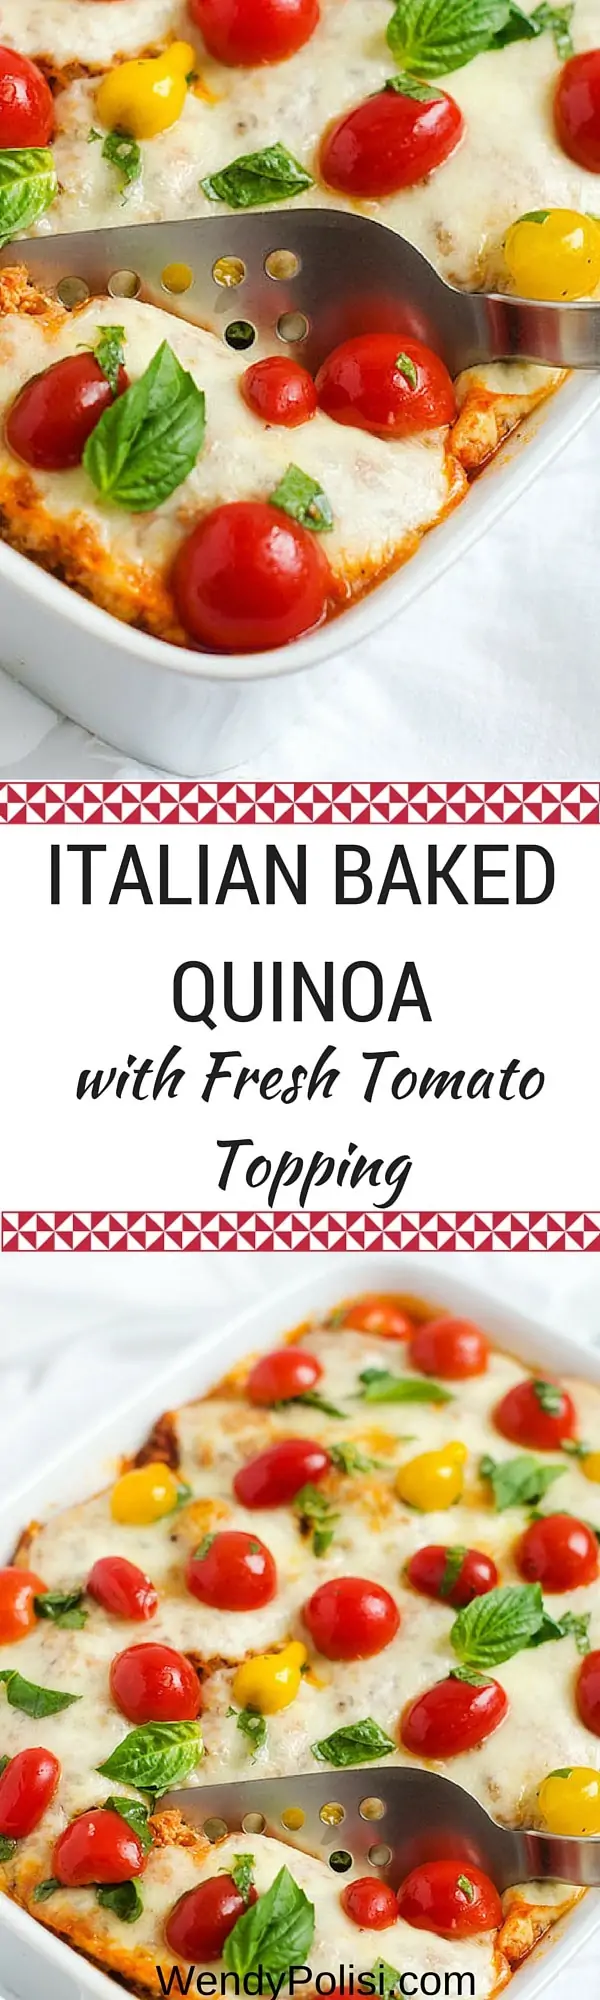 Italian Baked Quinoa with Fresh Tomato Topping - WendyPolisi.com